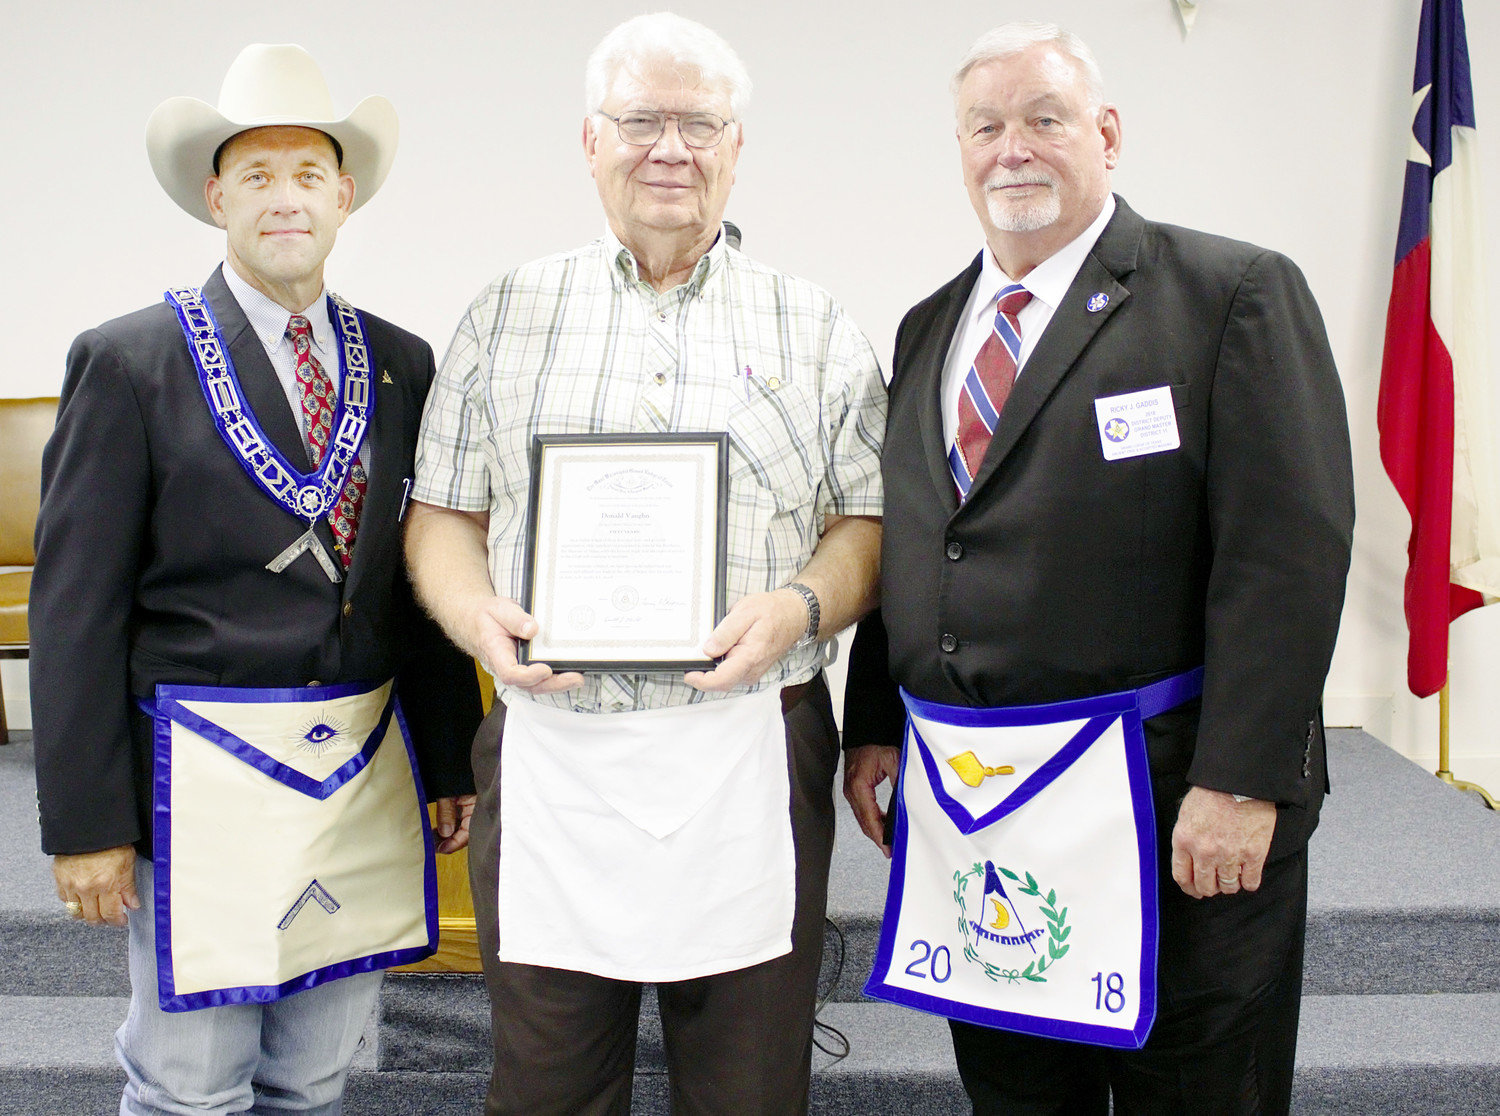 Donald Vaughn was presented with a 50 year pin commemorating his half century of Masonic service in a ceremony held on August 8th.  Pictured are Derek Spitzer, Master of the Lodge, Donald Vaughn and Ricky Gaddis DDGM. 